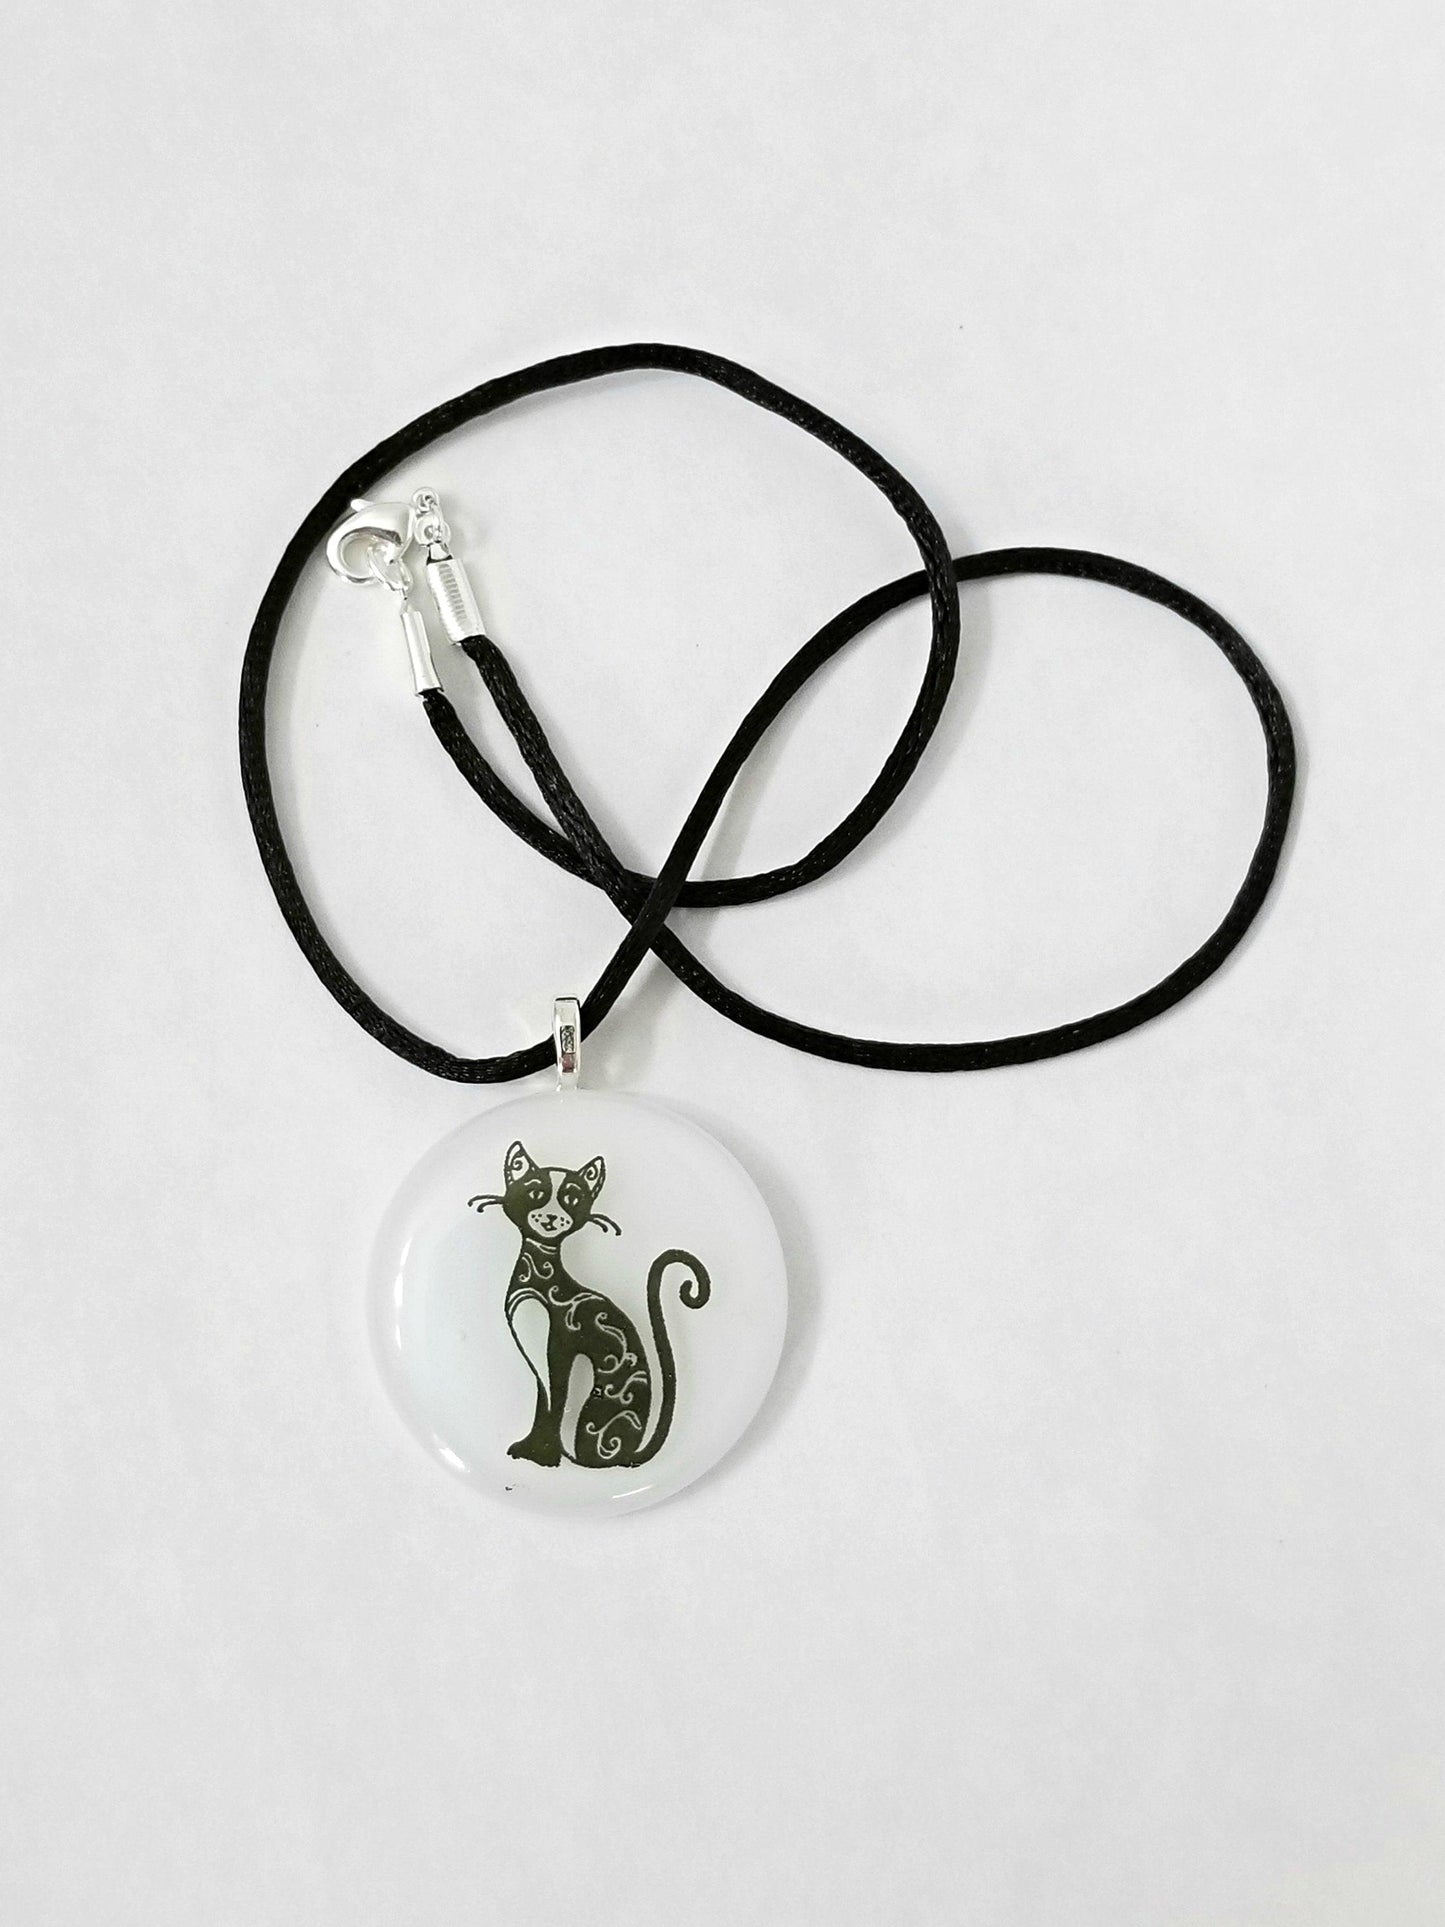 Black Whimsical Cat on White Circle  Fused Glass Pendant necklace jewelry on 18 inch black cord or 20 inch steel chain